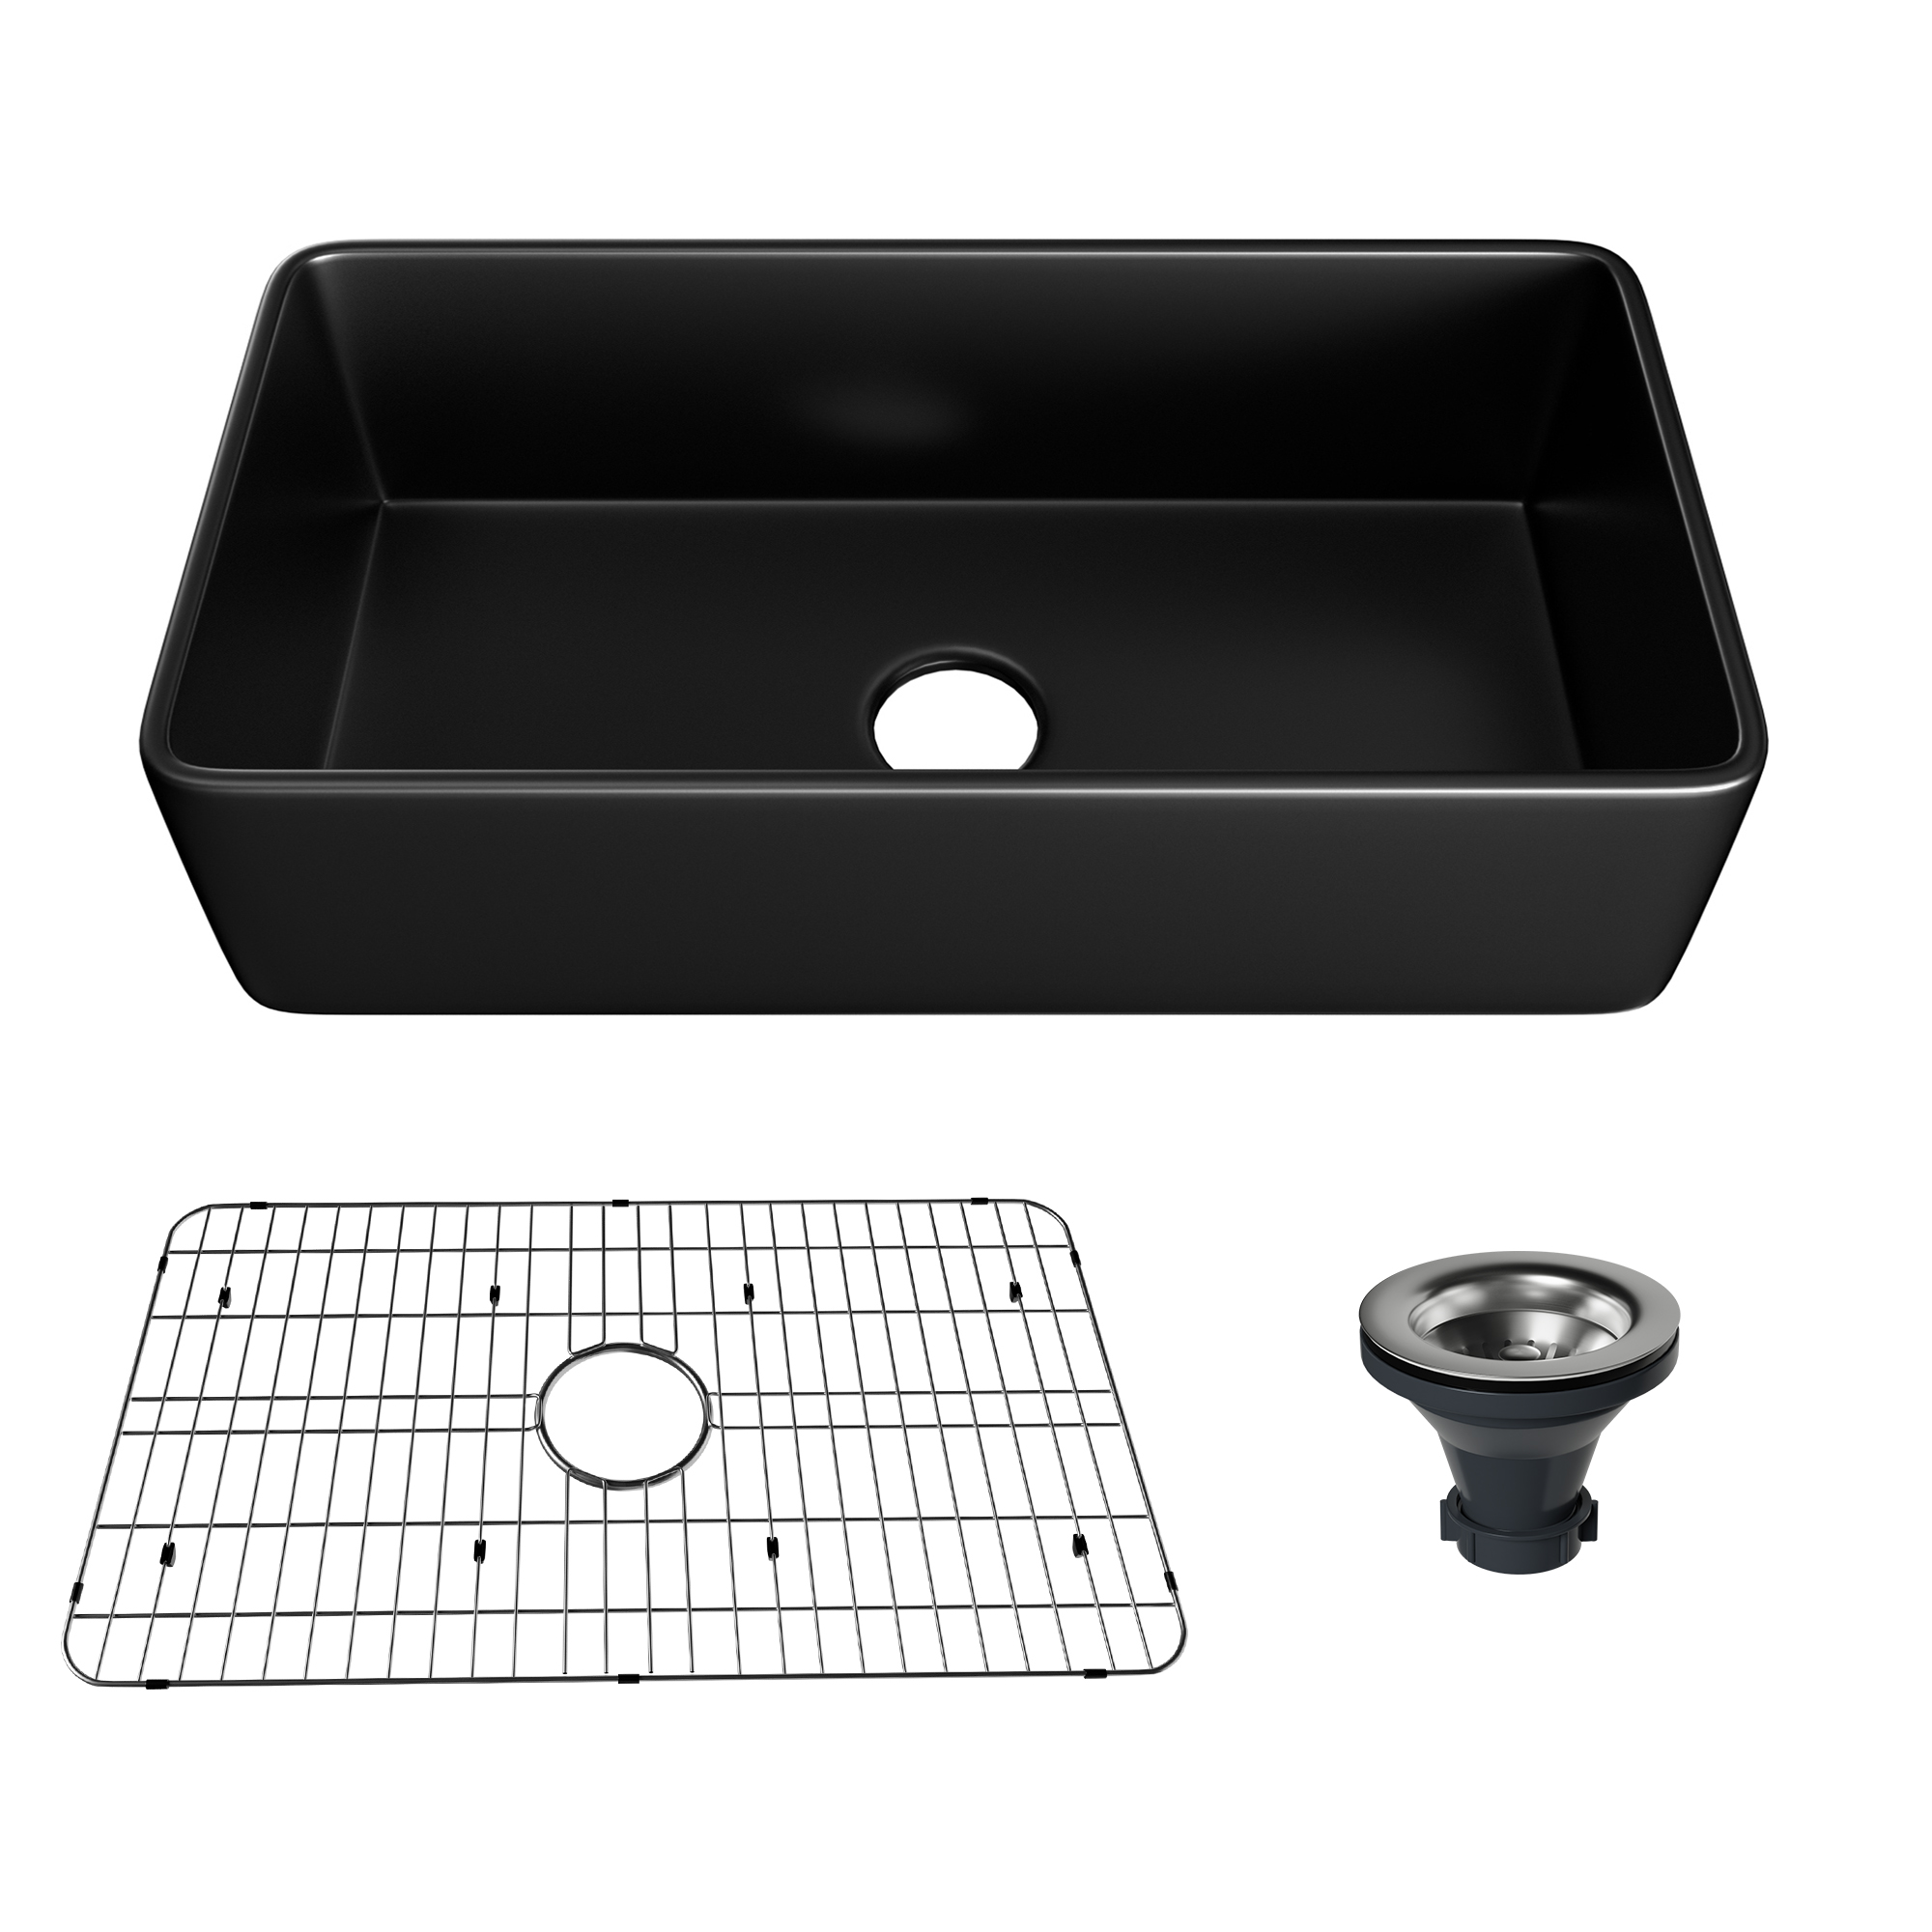 Farmhouse 36 In. Matte Black Single Bowl Fireclay Kitchen Sink Comes With Pull Down Kitchen Faucet-Mondawe